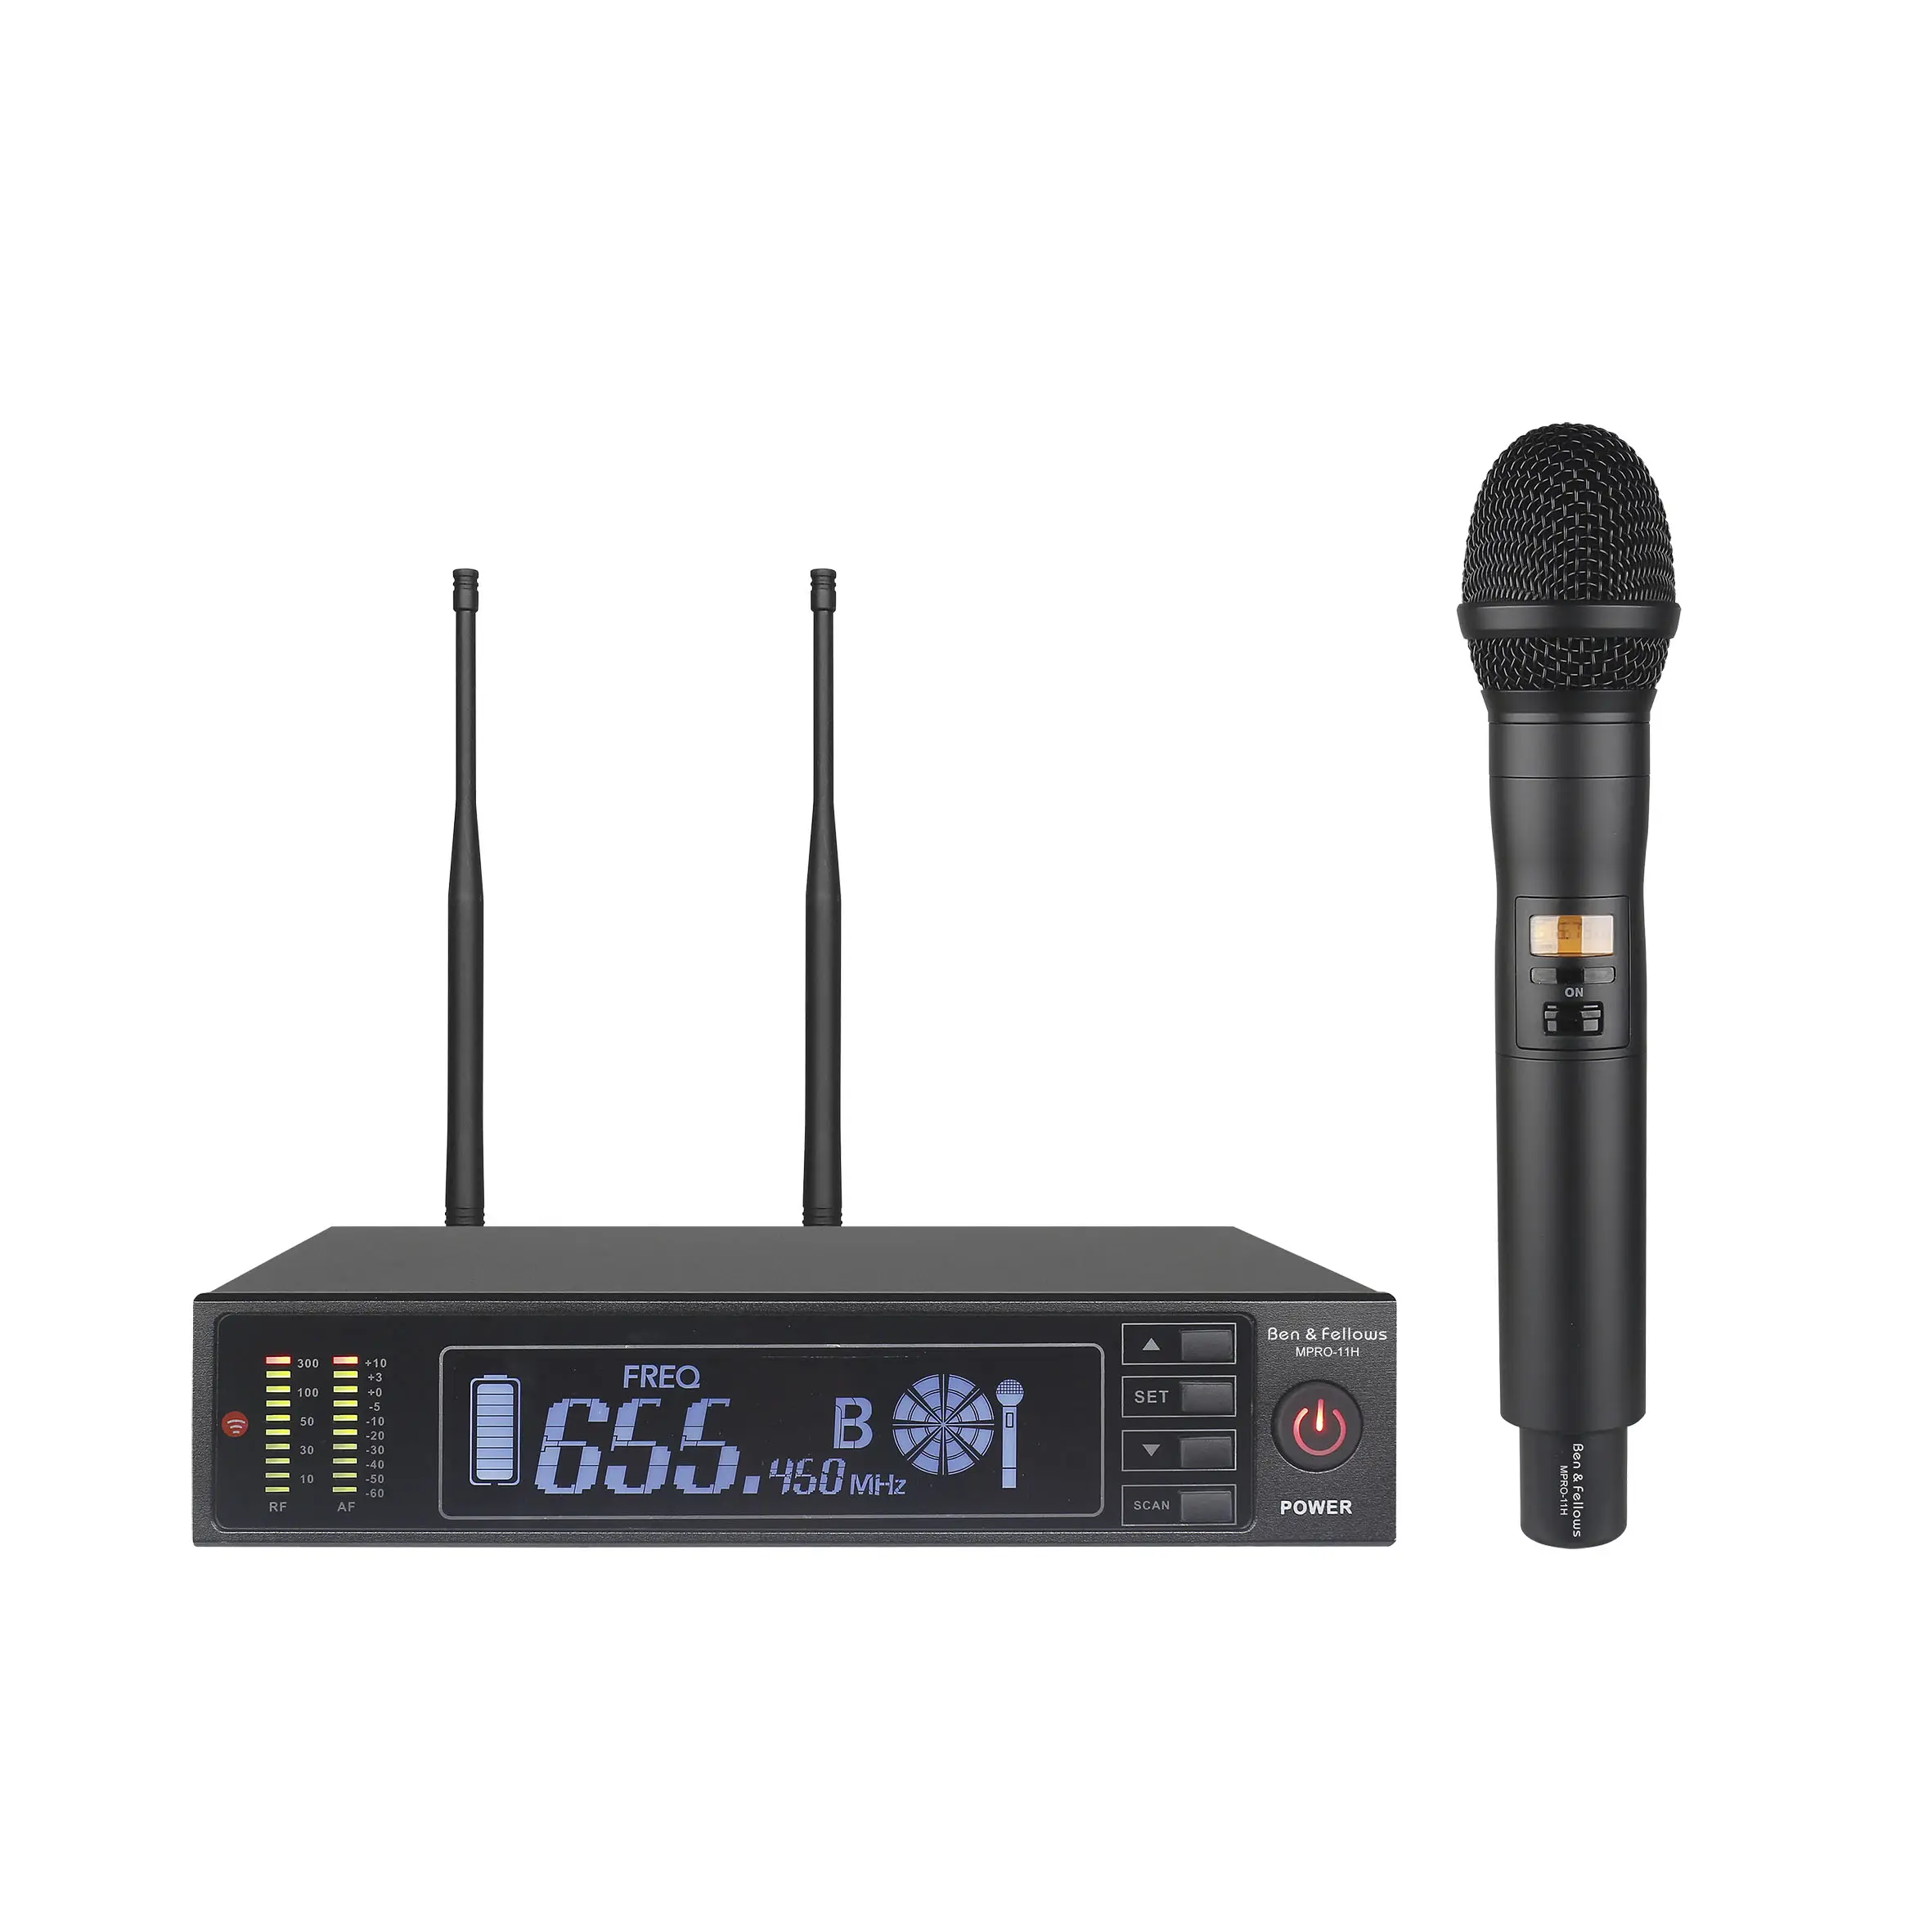 Professional UHF Wireless Single Channel Microphone Karaoke Handheld One-touch QuickScan Home KTV Wireless Microphones FM